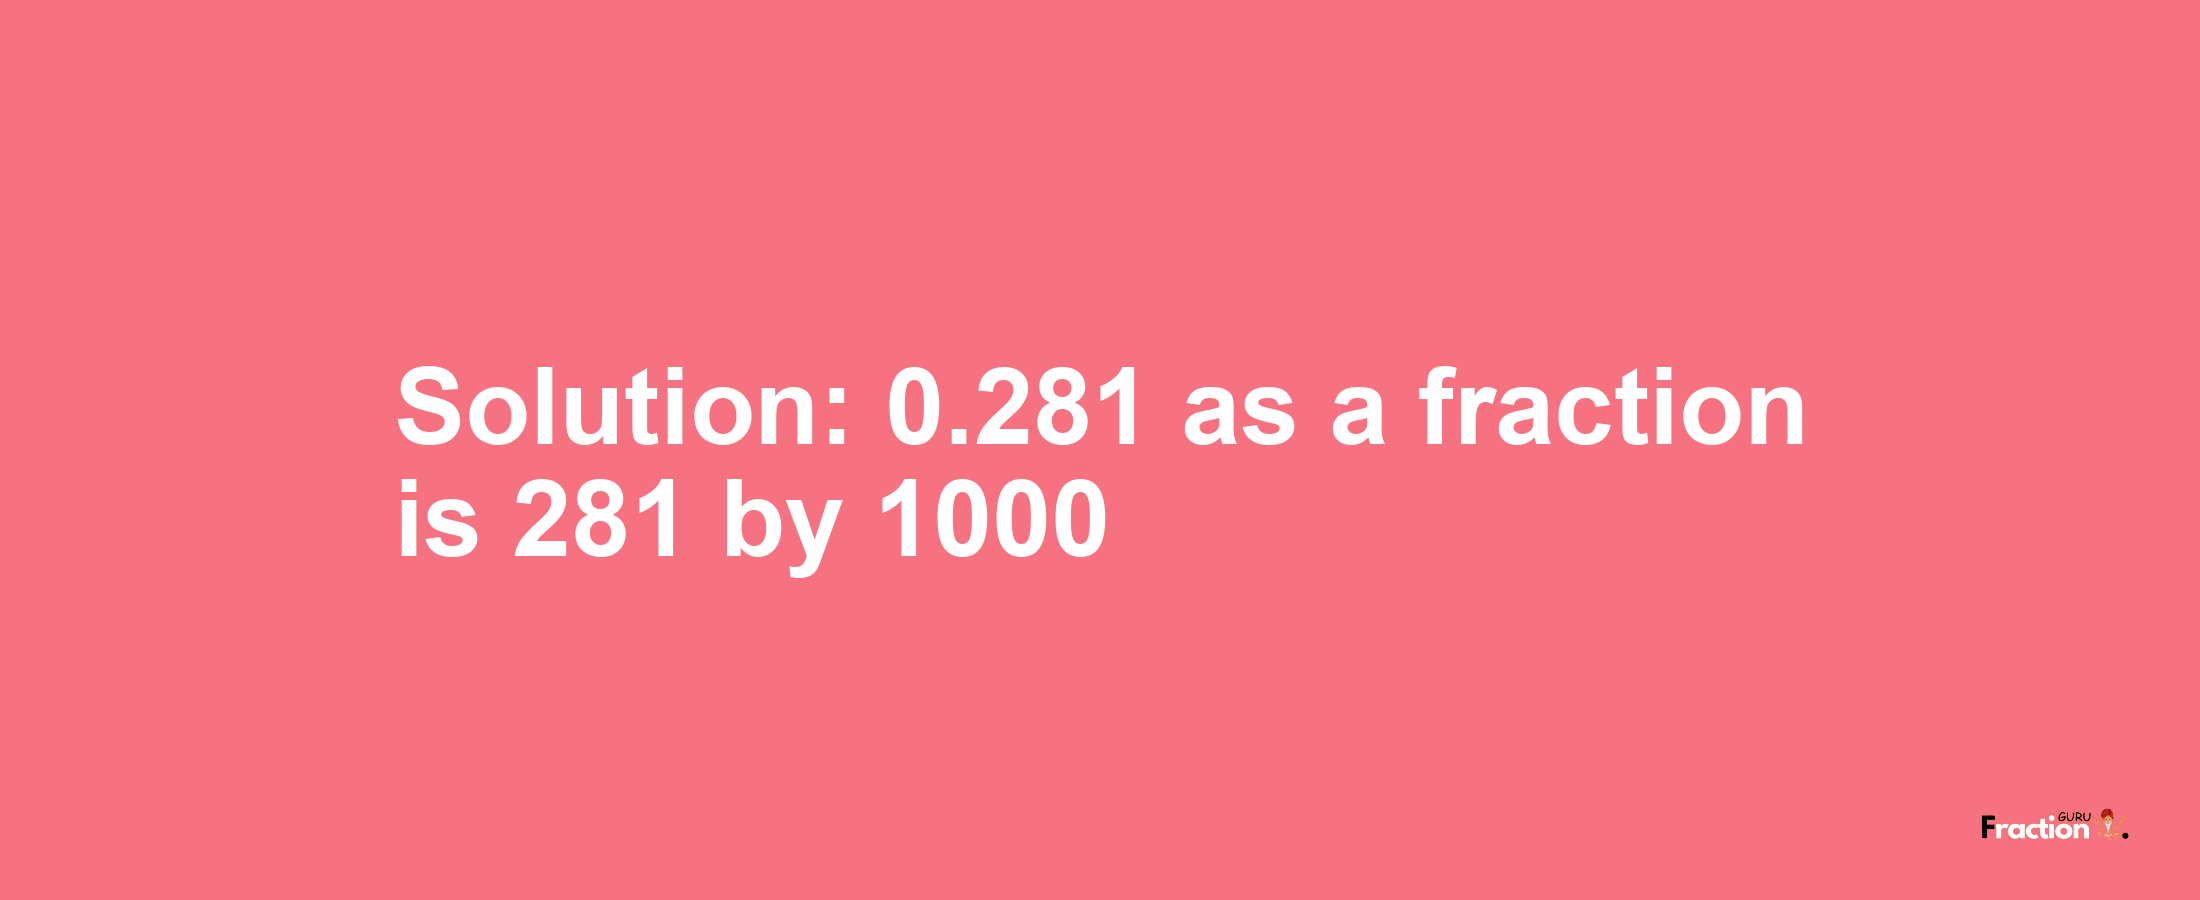 Solution:0.281 as a fraction is 281/1000